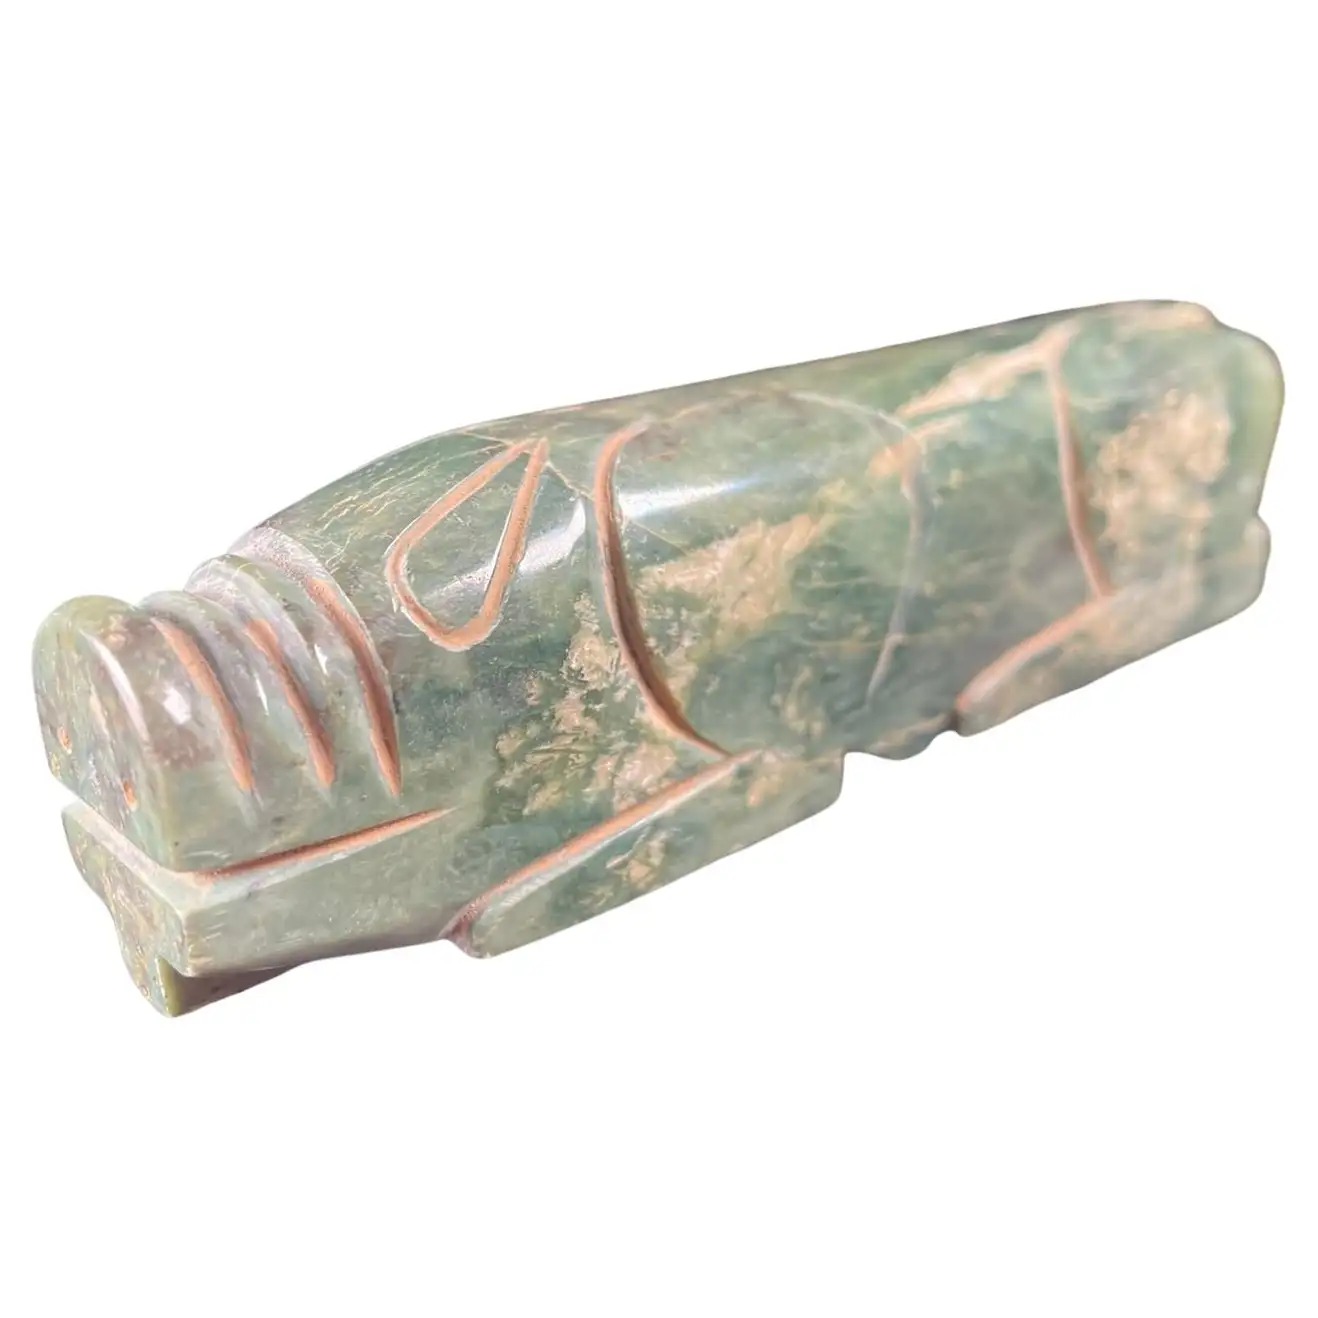 China Large Jade Pendant Pig with Deep Green Colors